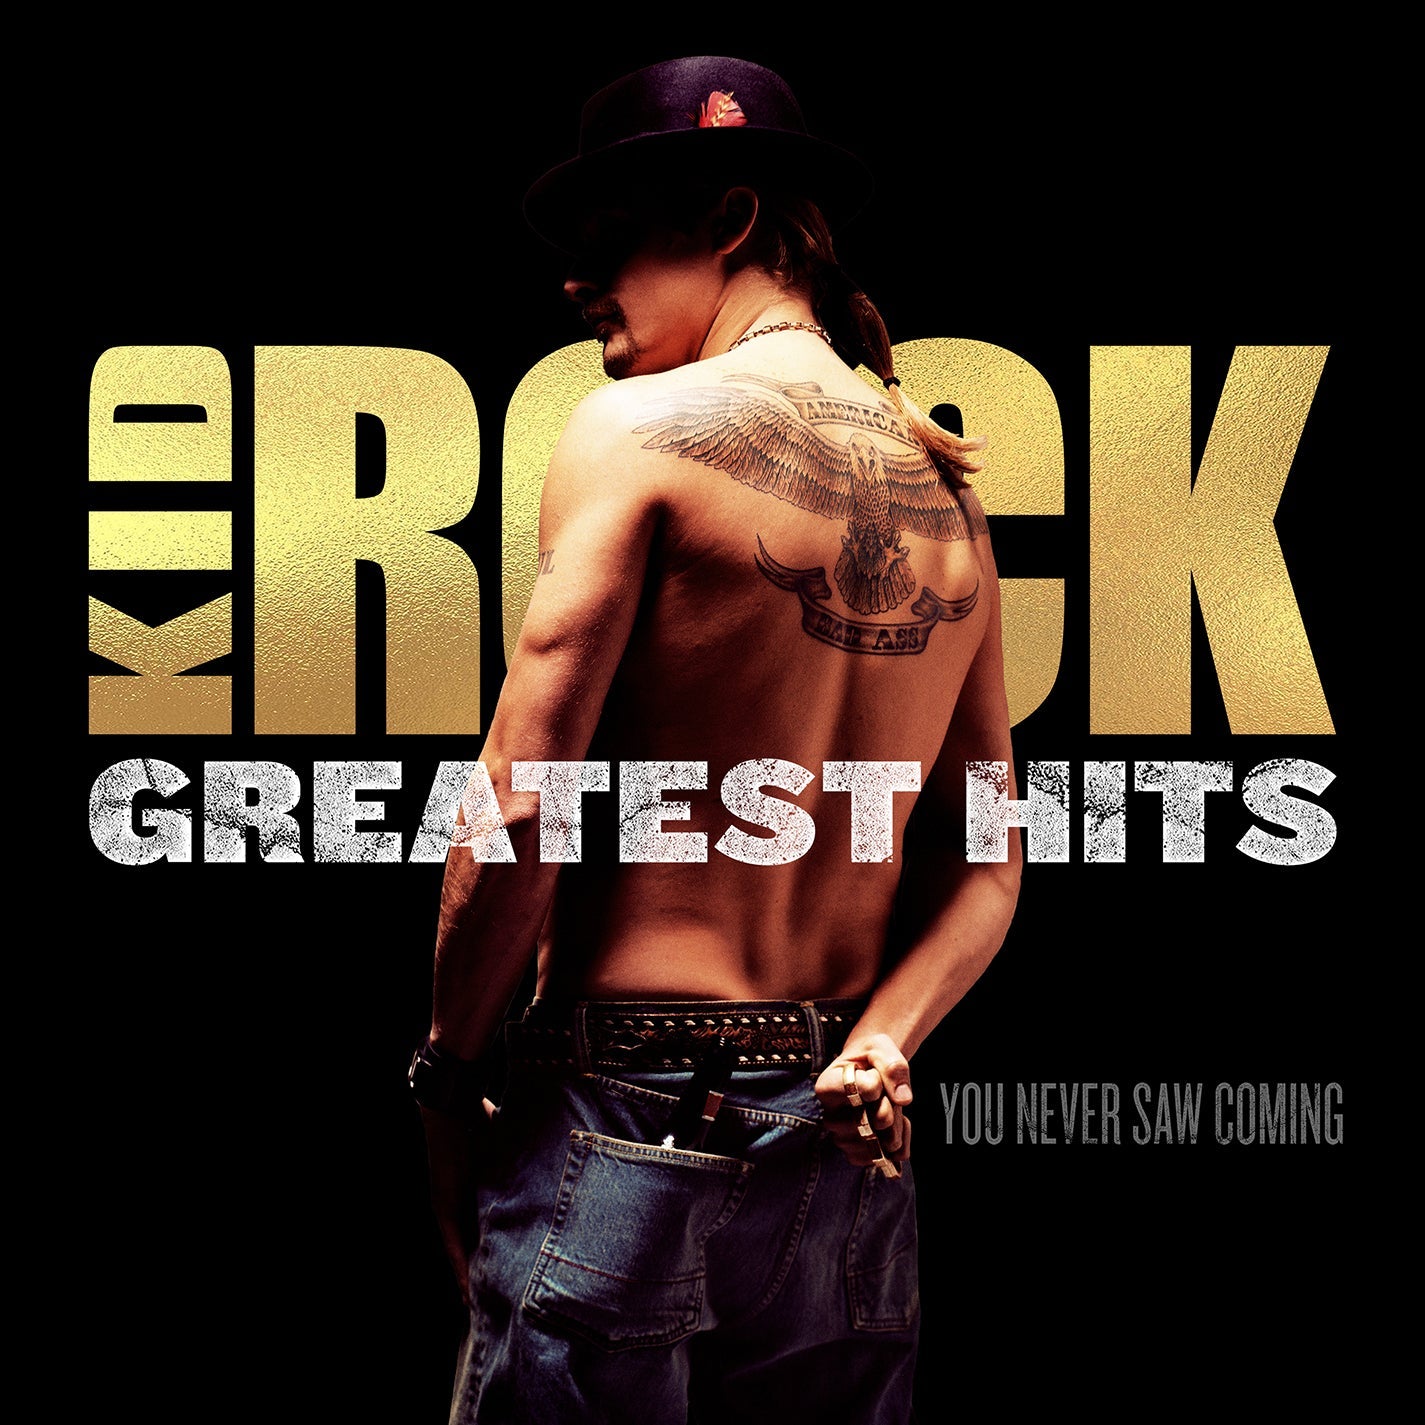 [DAMAGED] Kid Rock - Greatest Hits: You Never Saw Coming